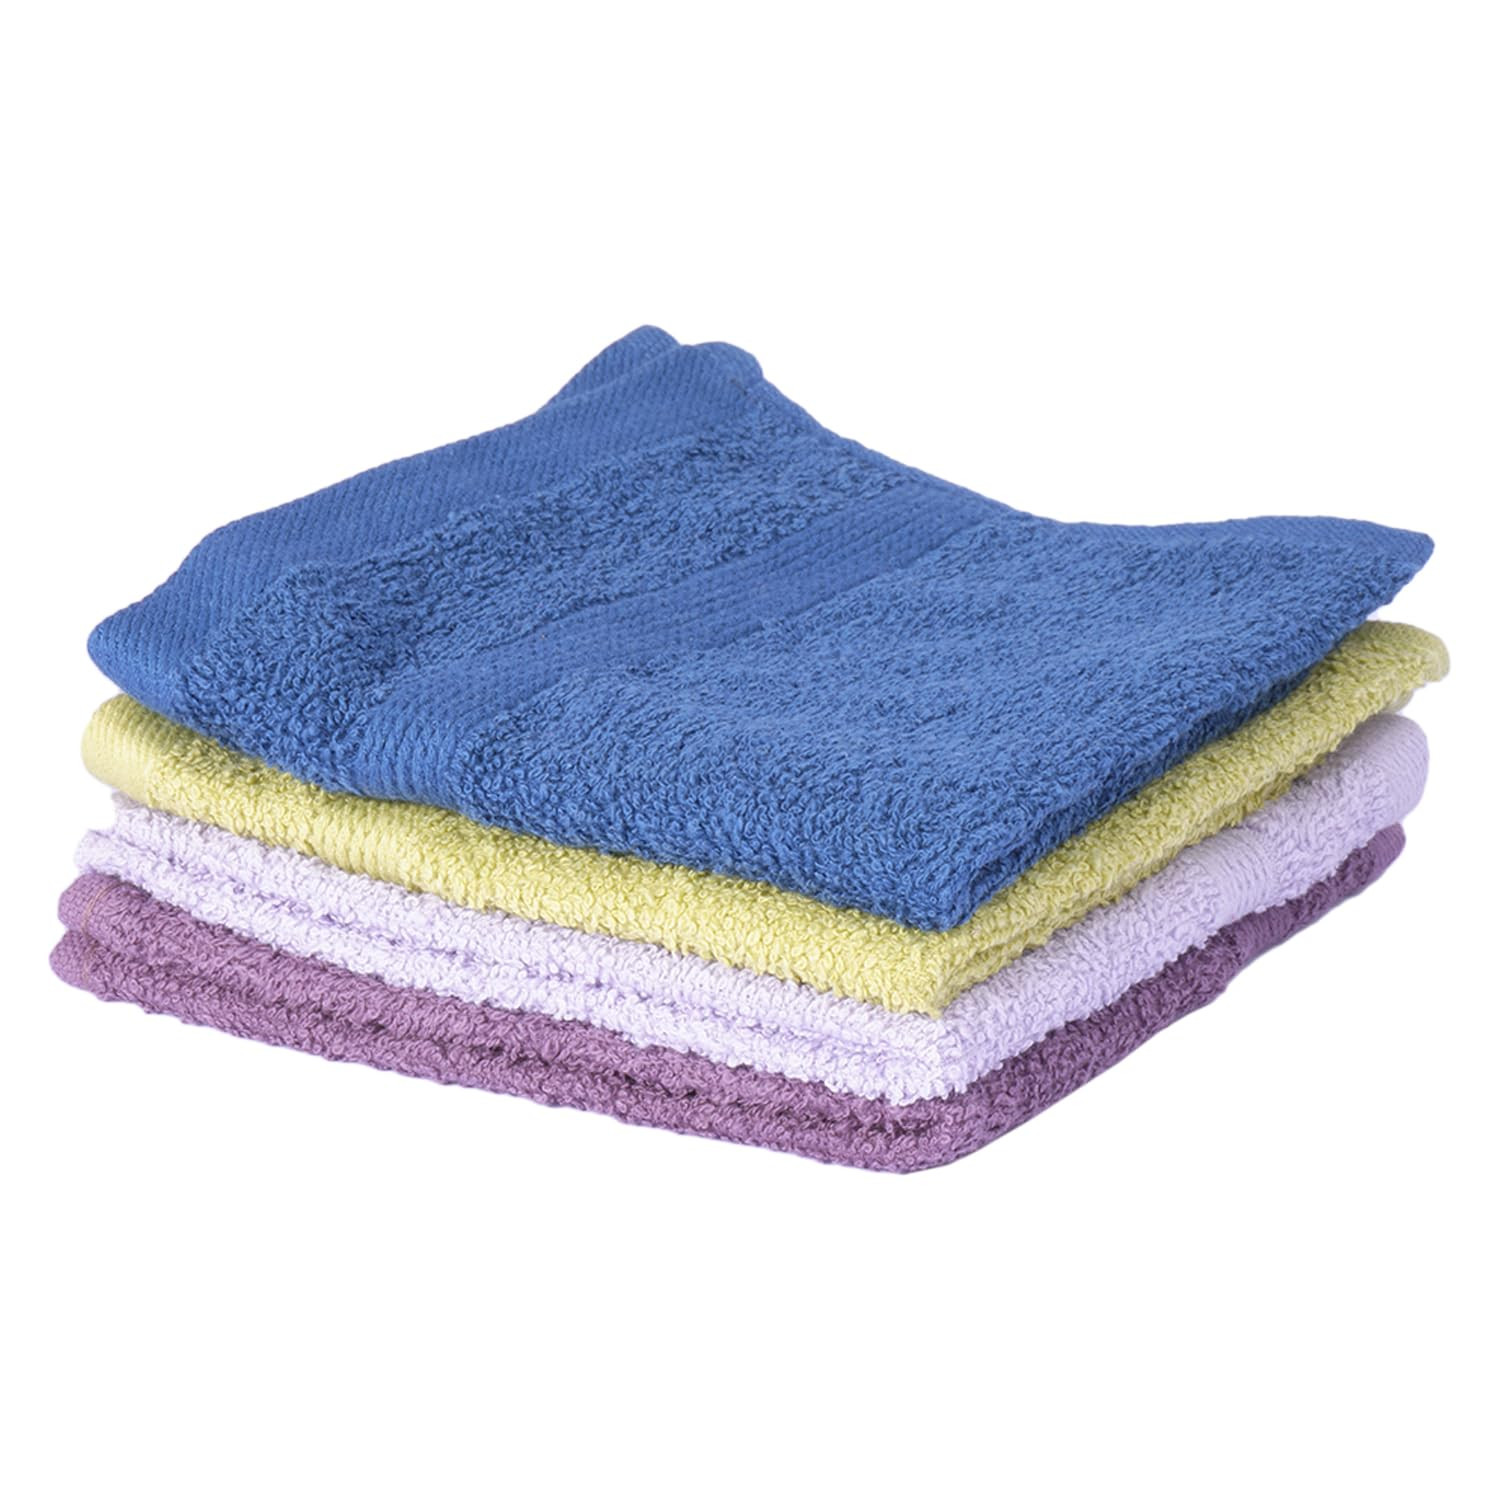 Kuber Industries 525 GSM Cotton Face towels |Super Soft, Quick Absorbent & Anti-Bacterial|Gym & Workout Towels|Pack of 4 (Multi)